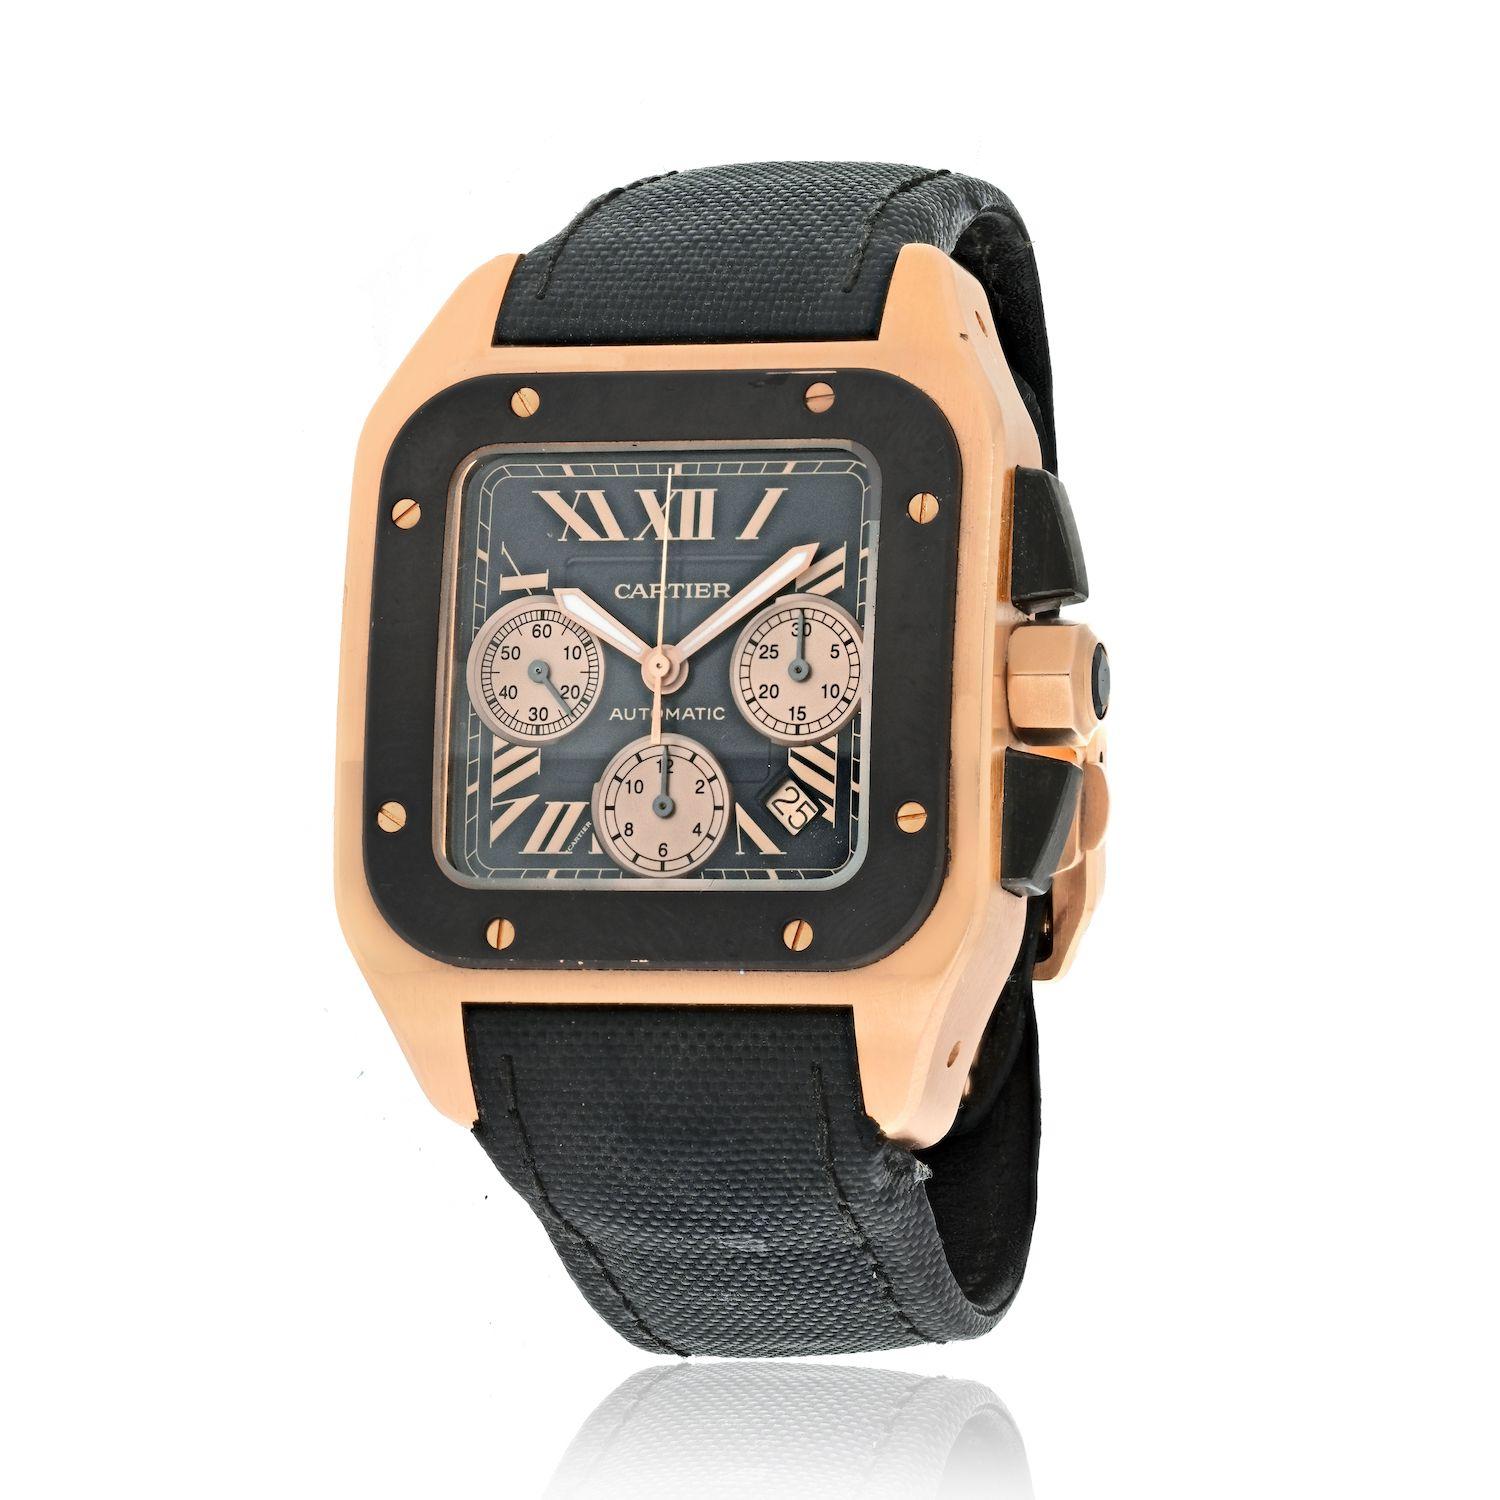 Cartier 18K Rose Gold Santos 100 XL Chronograph Mens Wrist Watch.
Santos 100, reference 2935 Pink gold automatic chronograph wristwatch with date circa 2009.
Dial: black
Calibre: cal. 8630 automatic, 27 jewels
Case: 18k Pink gold, with caseback